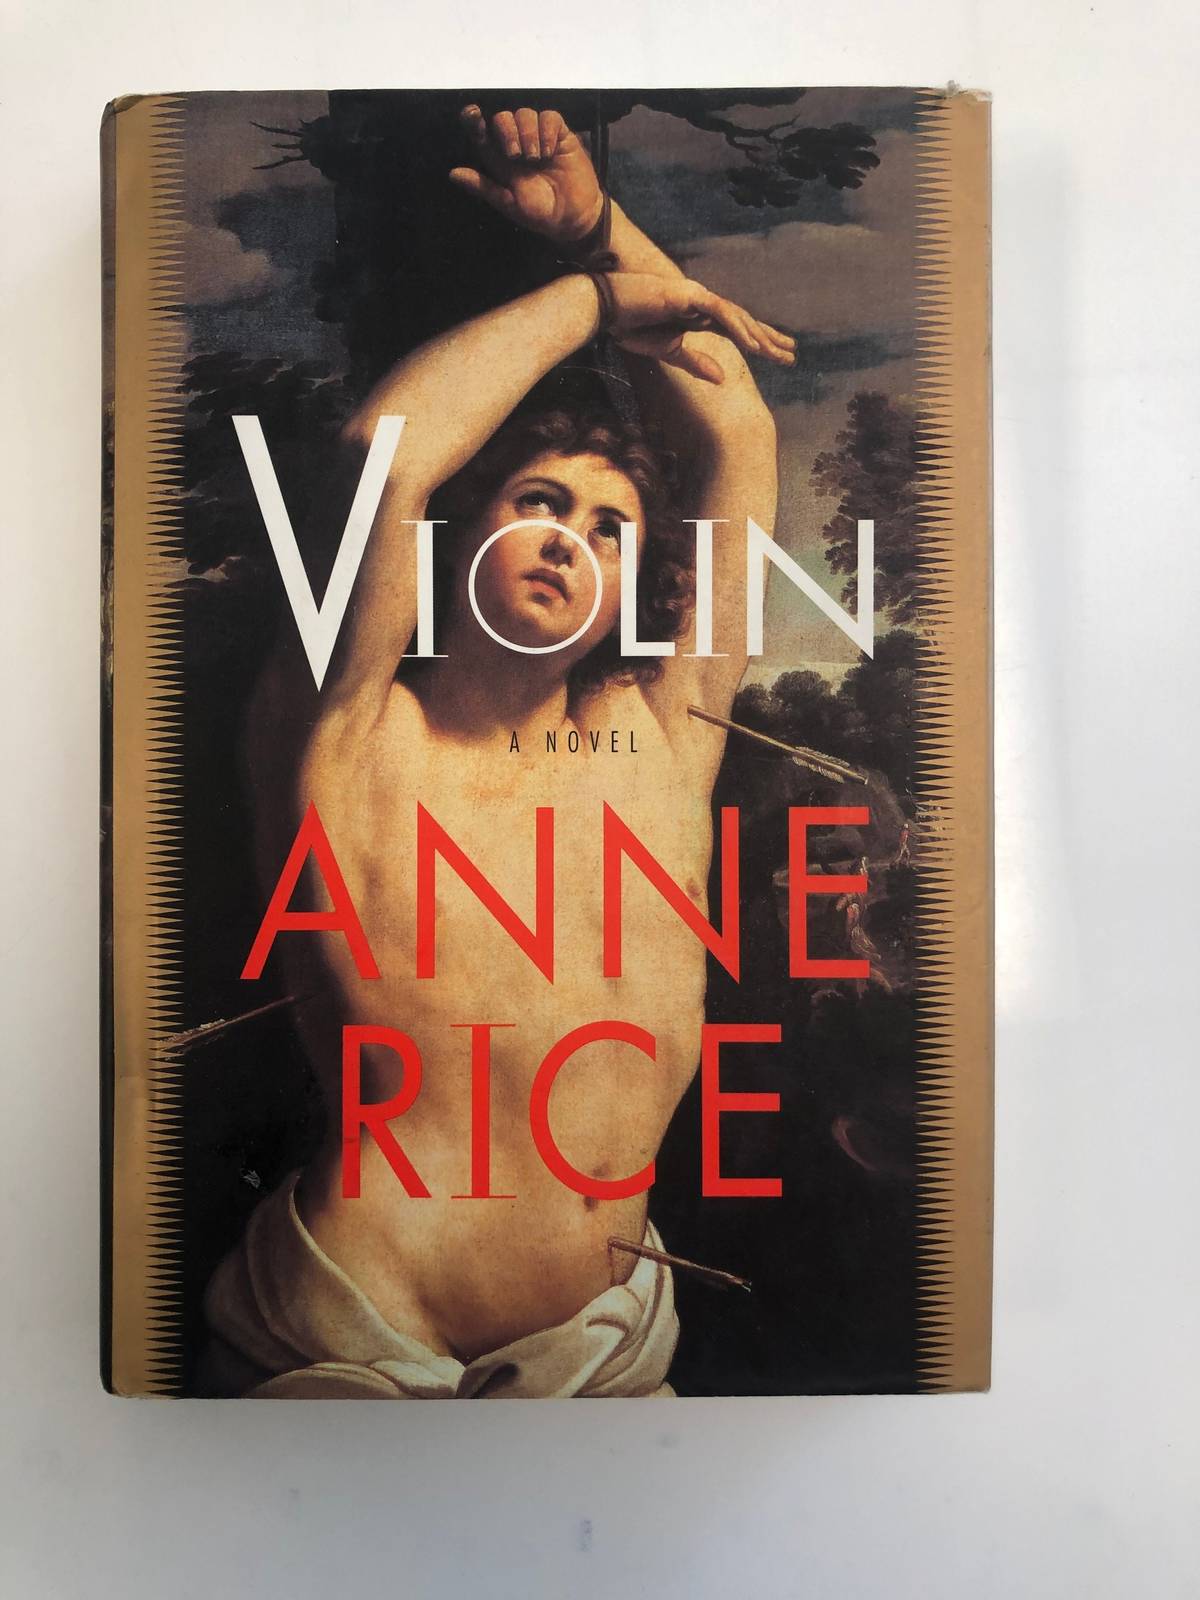 Primary image for Violin - Anne Rice Autographed Book